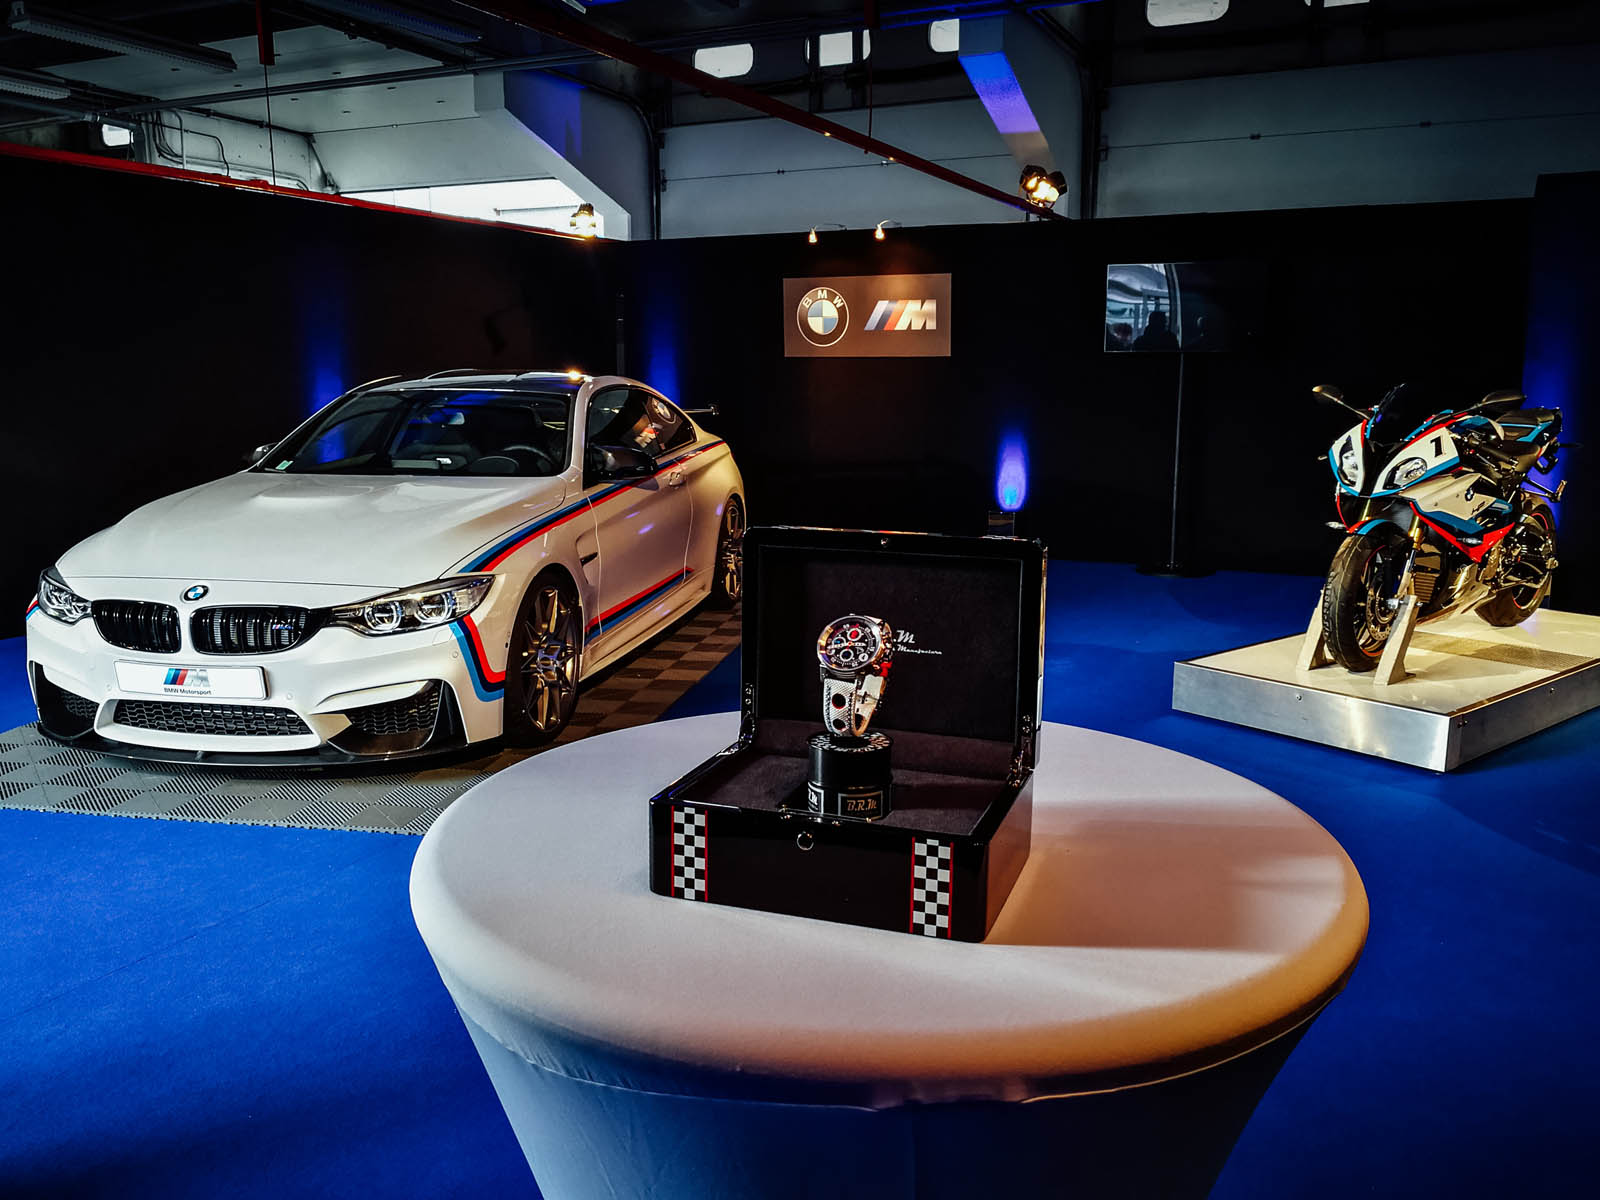 Limited-Run BMW M4 Magny-Cours Edition & BMW Bike & Wristwatch Available for €180,000